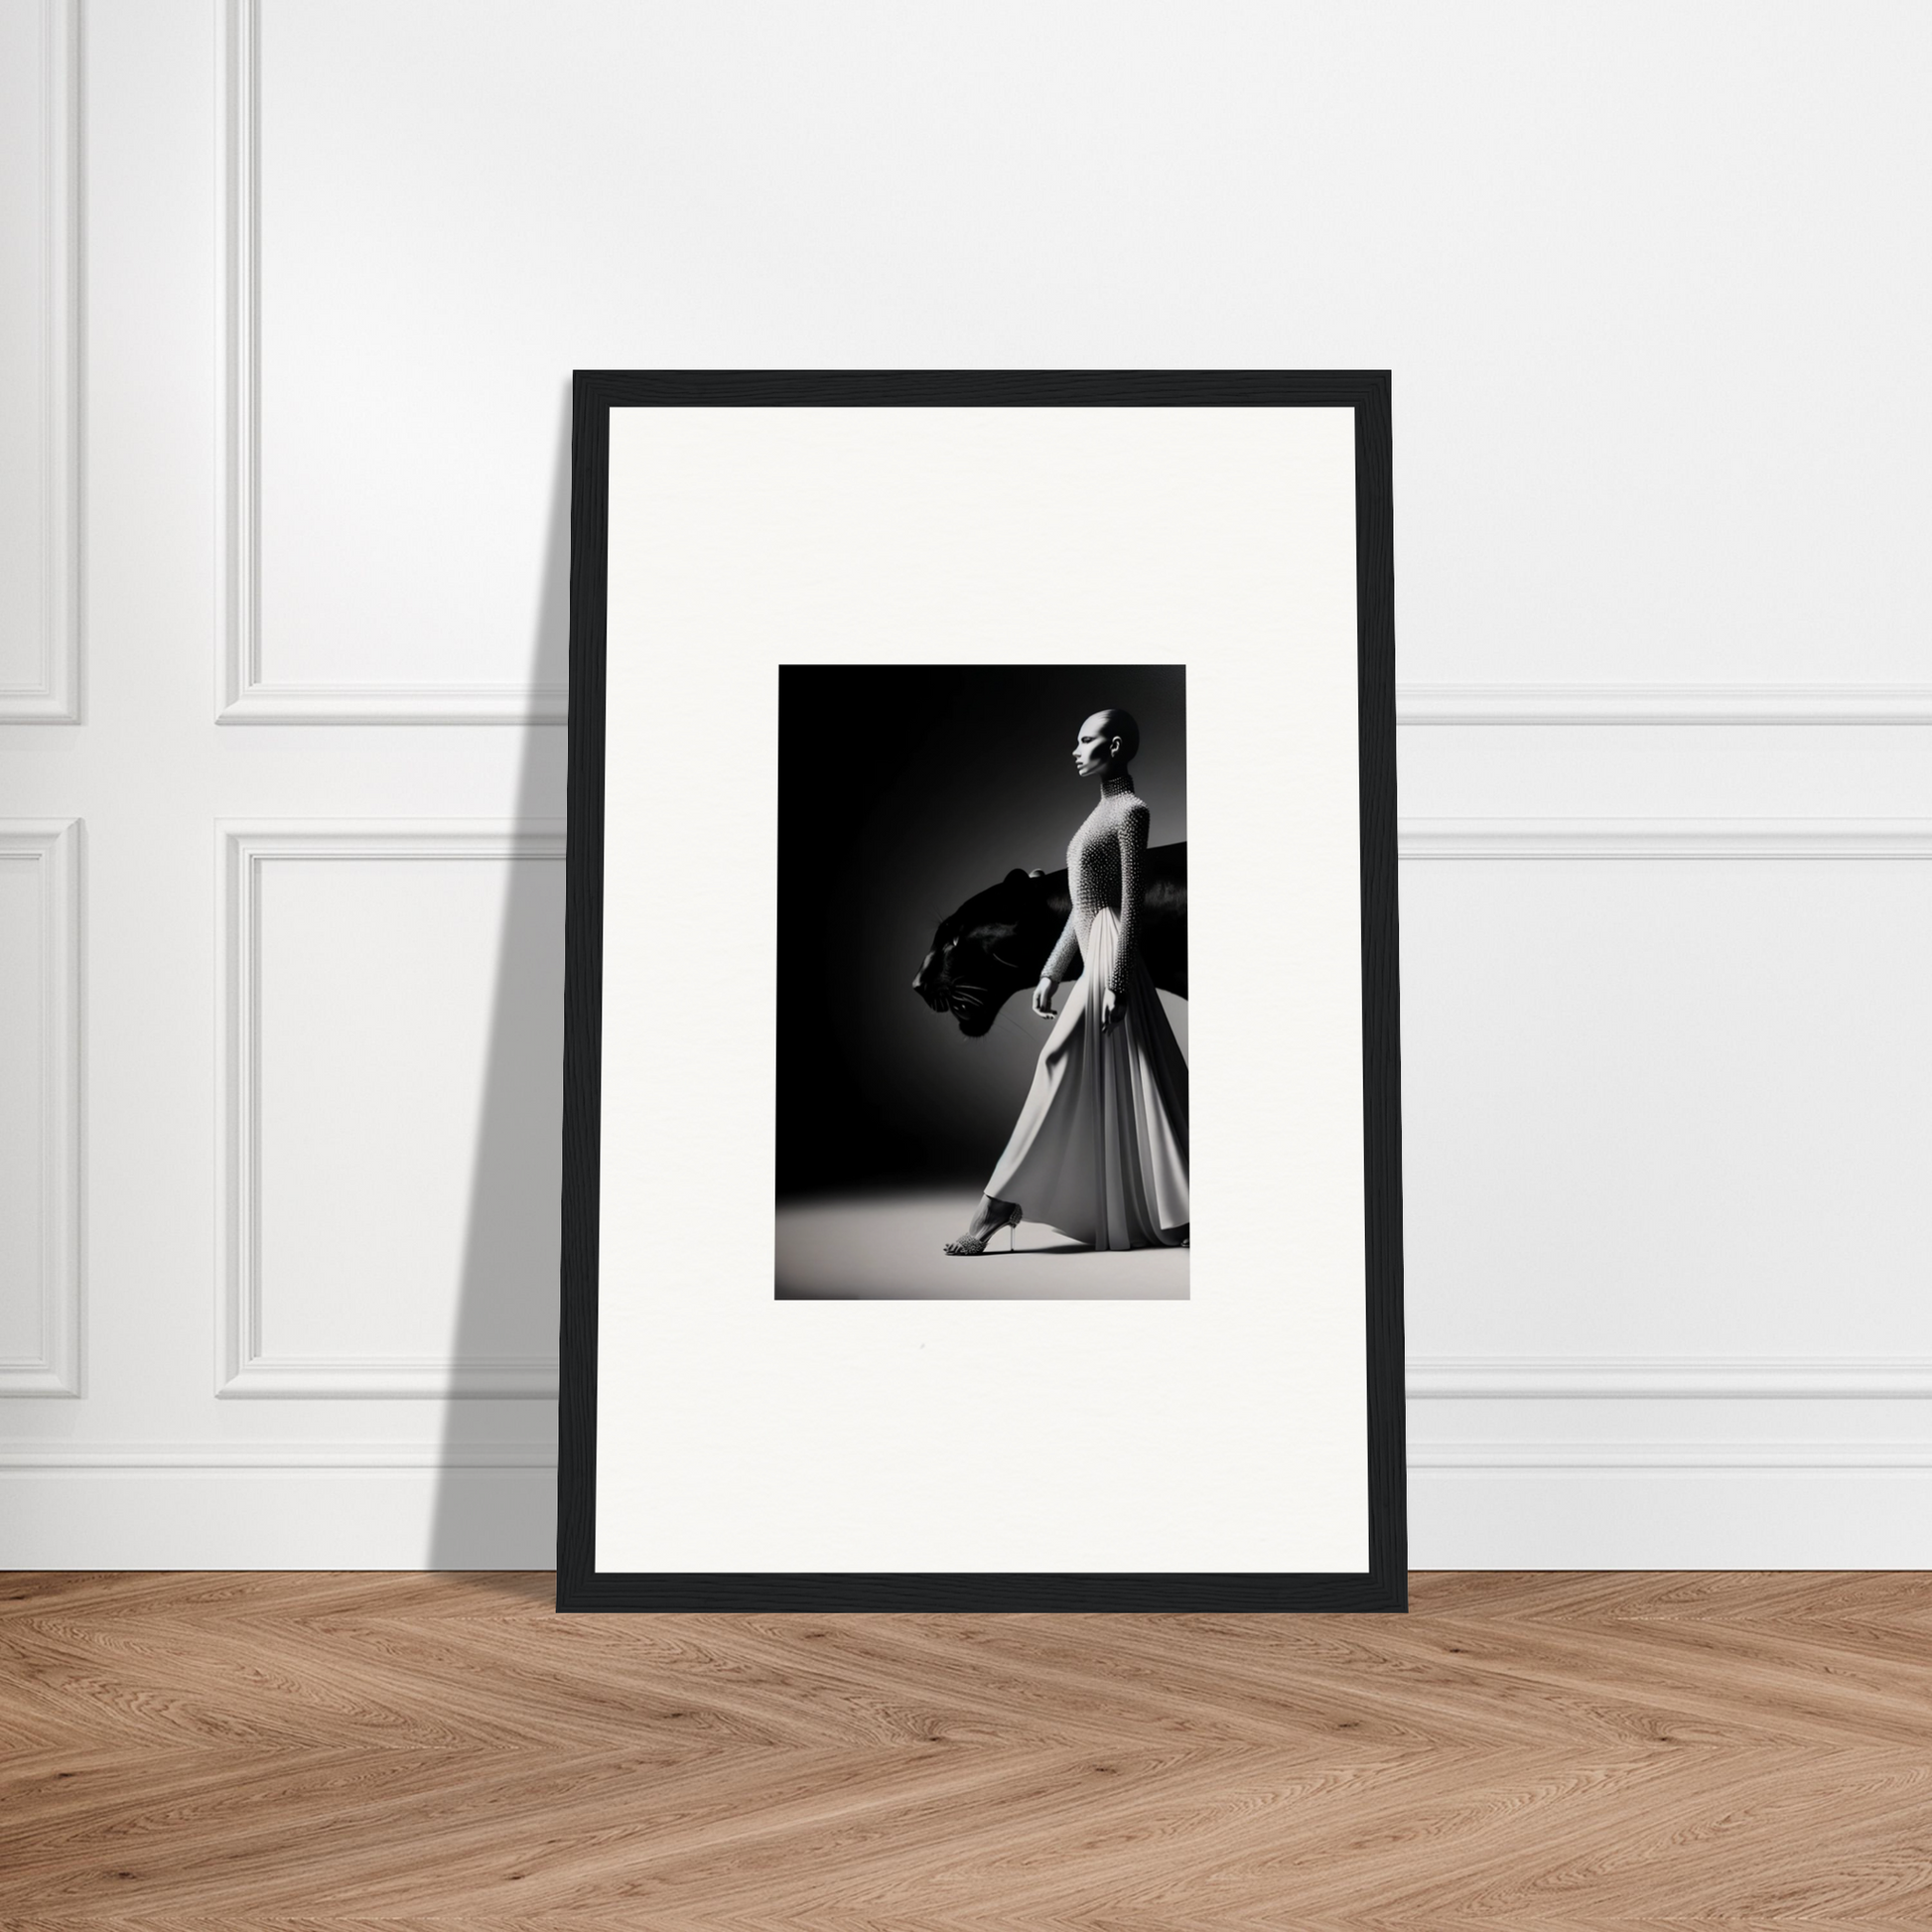 Dancers and time a3 - framed poster - print material